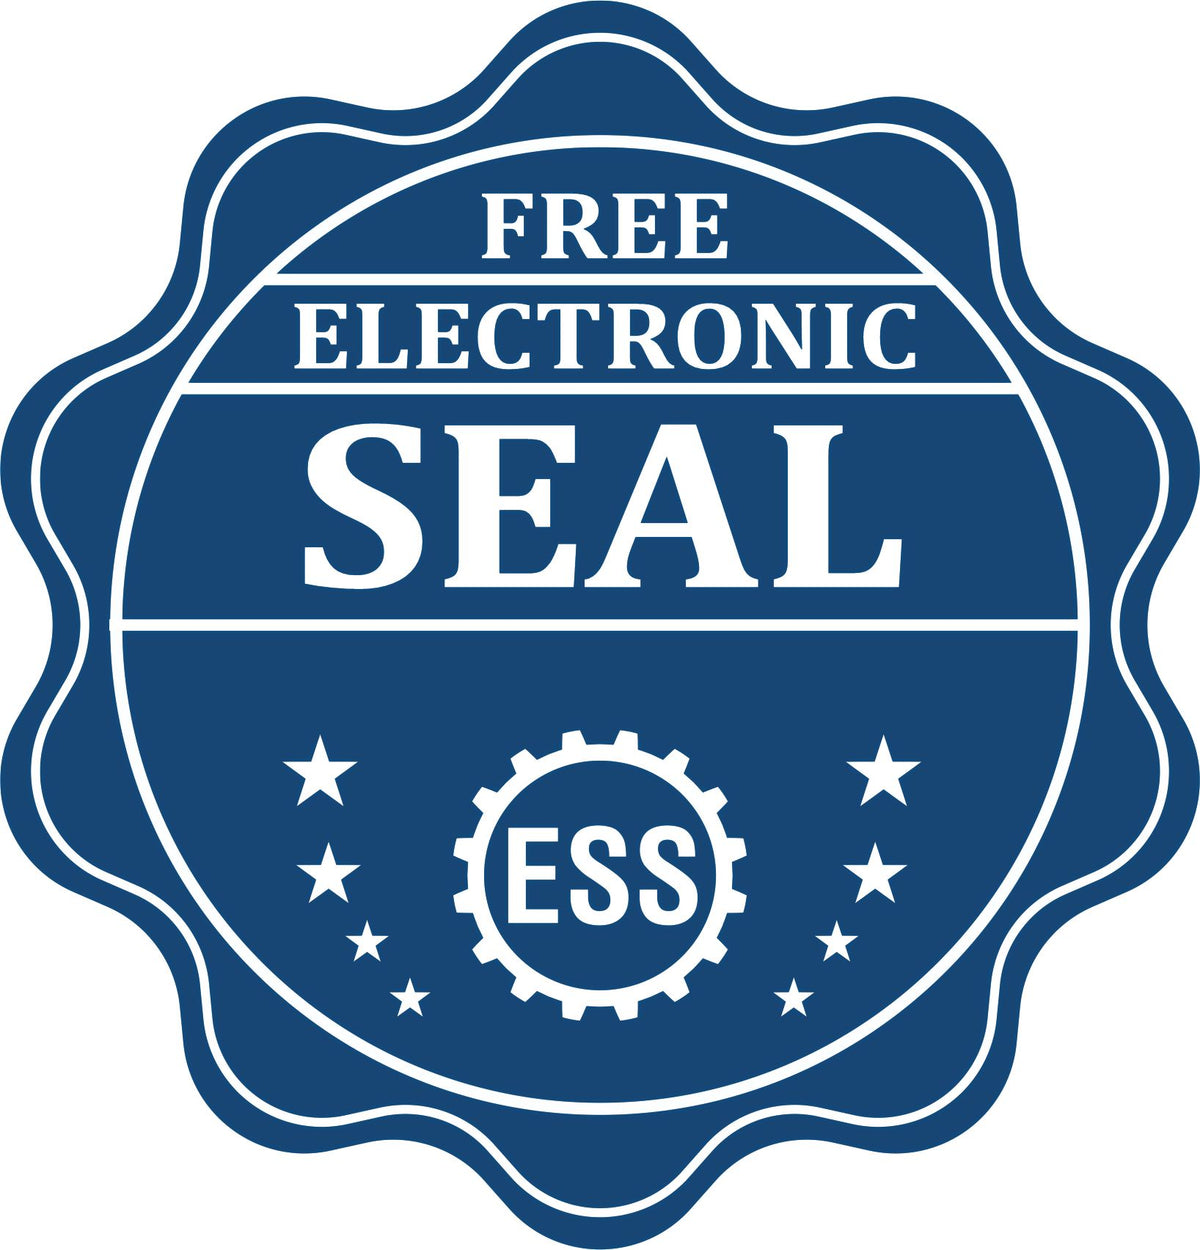 A badge showing a free electronic seal for the Extended Long Reach Michigan Surveyor Embosser with stars and the ESS gear on the emblem.